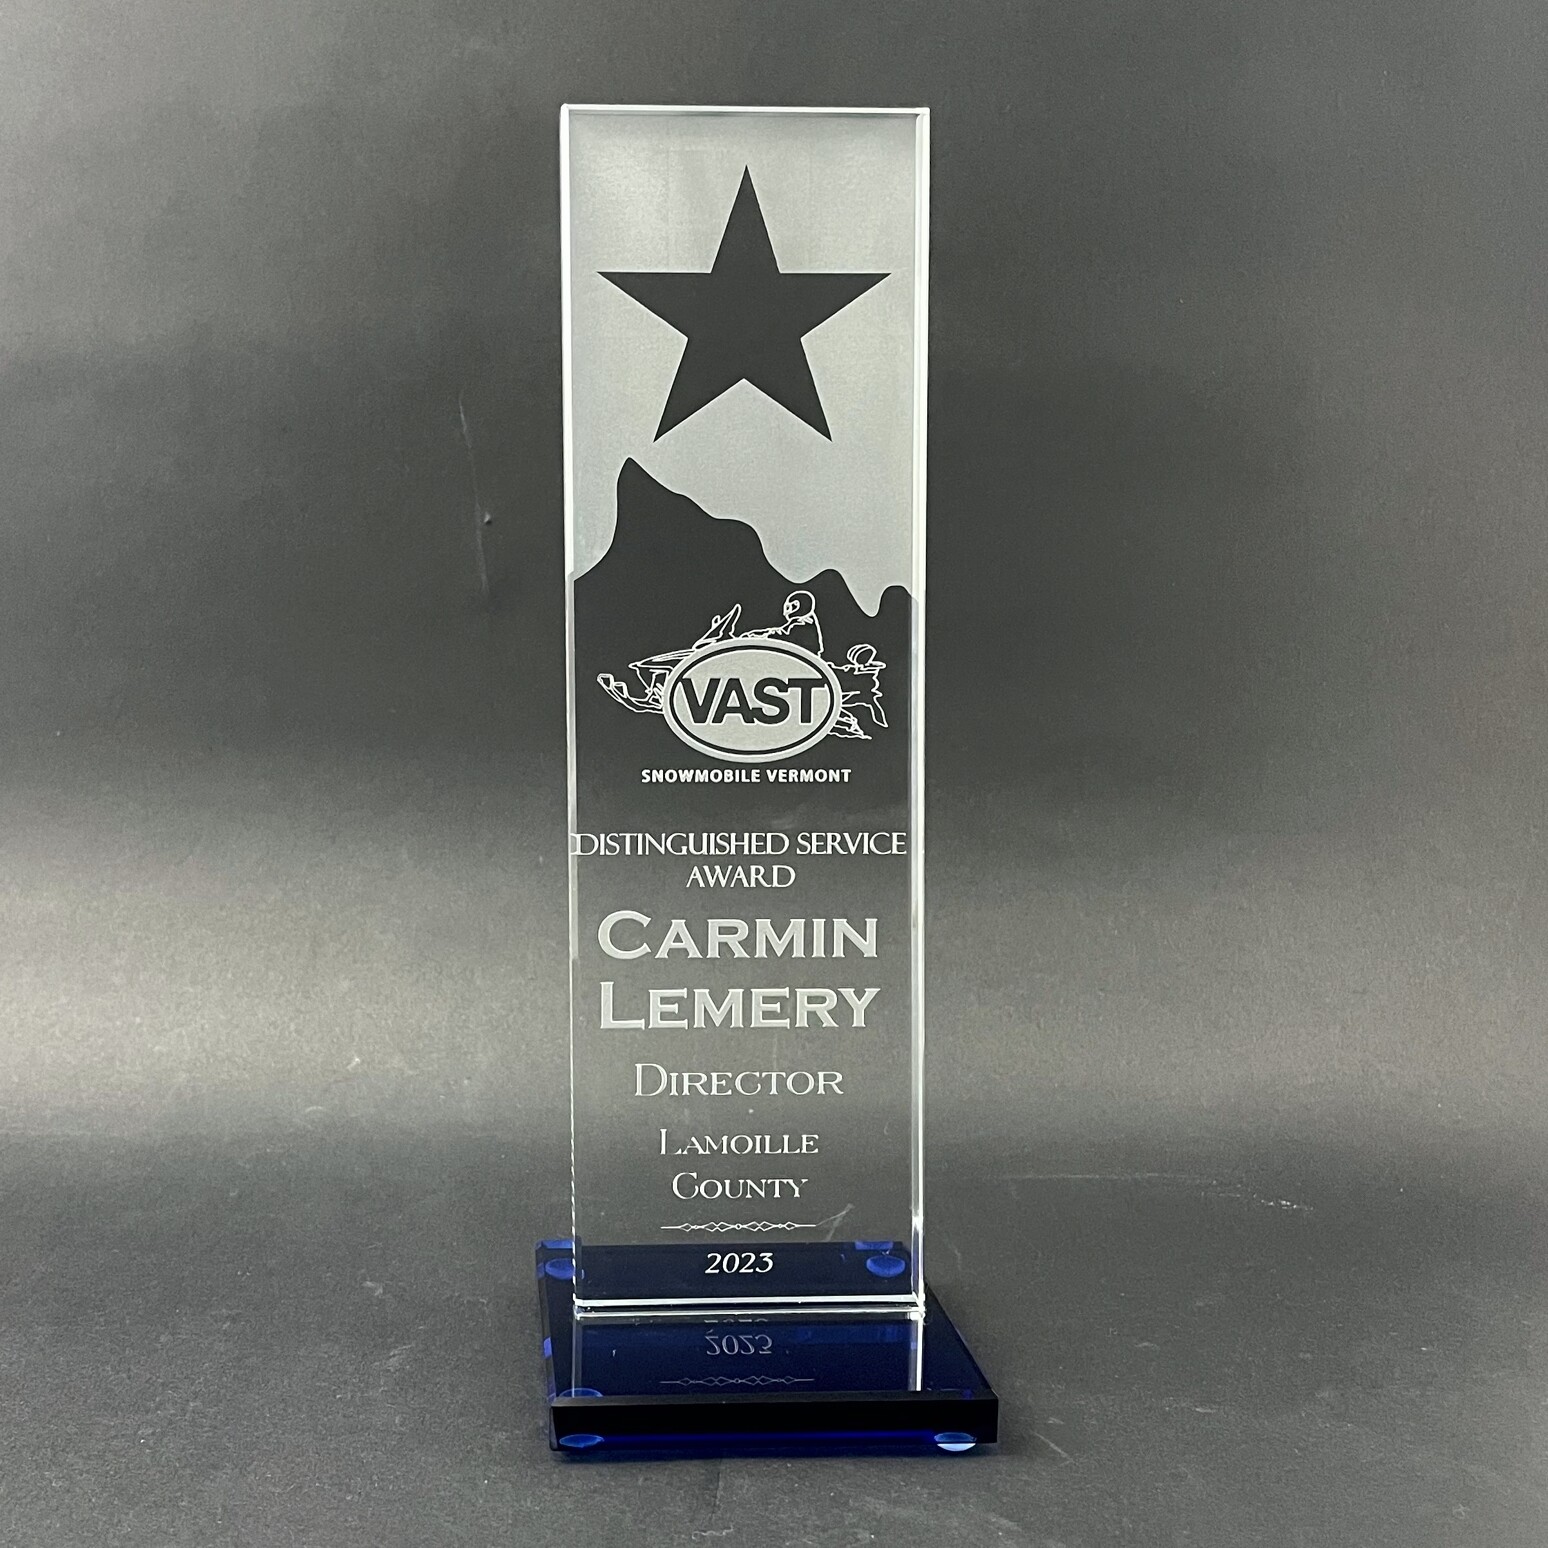 Glass Award with Star and Etched Mountain Peak